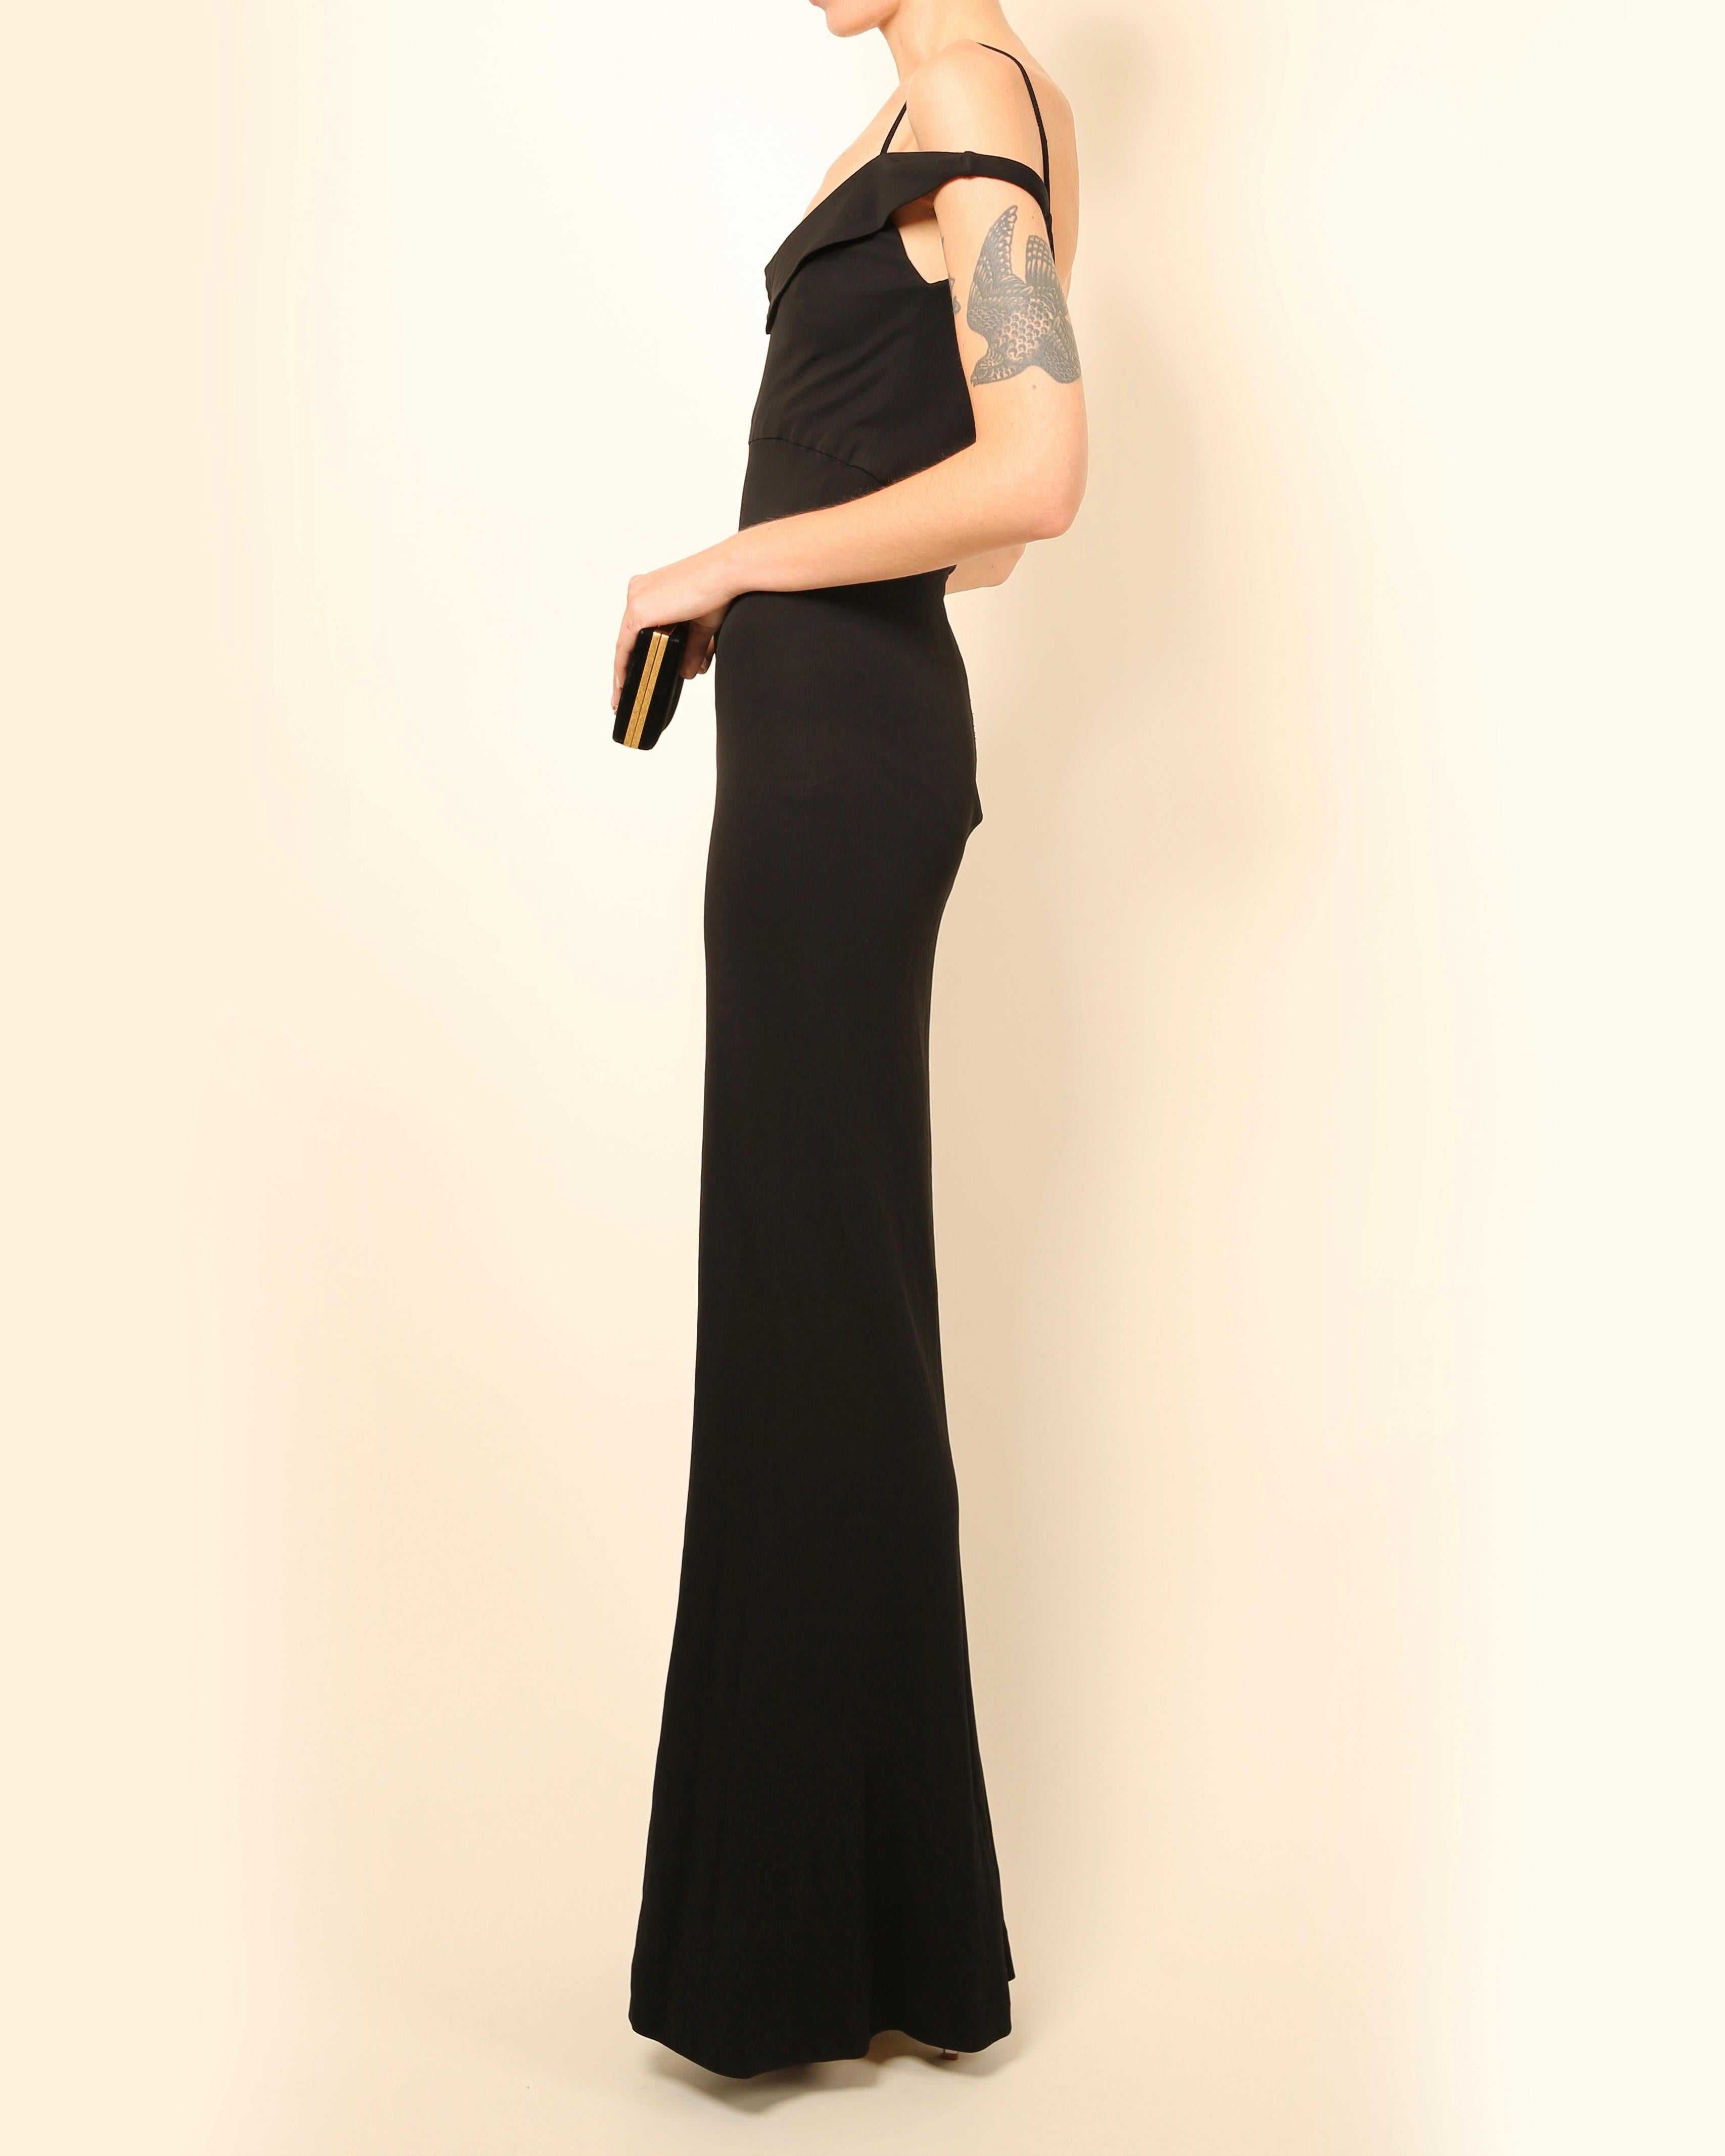 Vera Wang black off the shoulder fitted floor length maxi dress gown For Sale 1